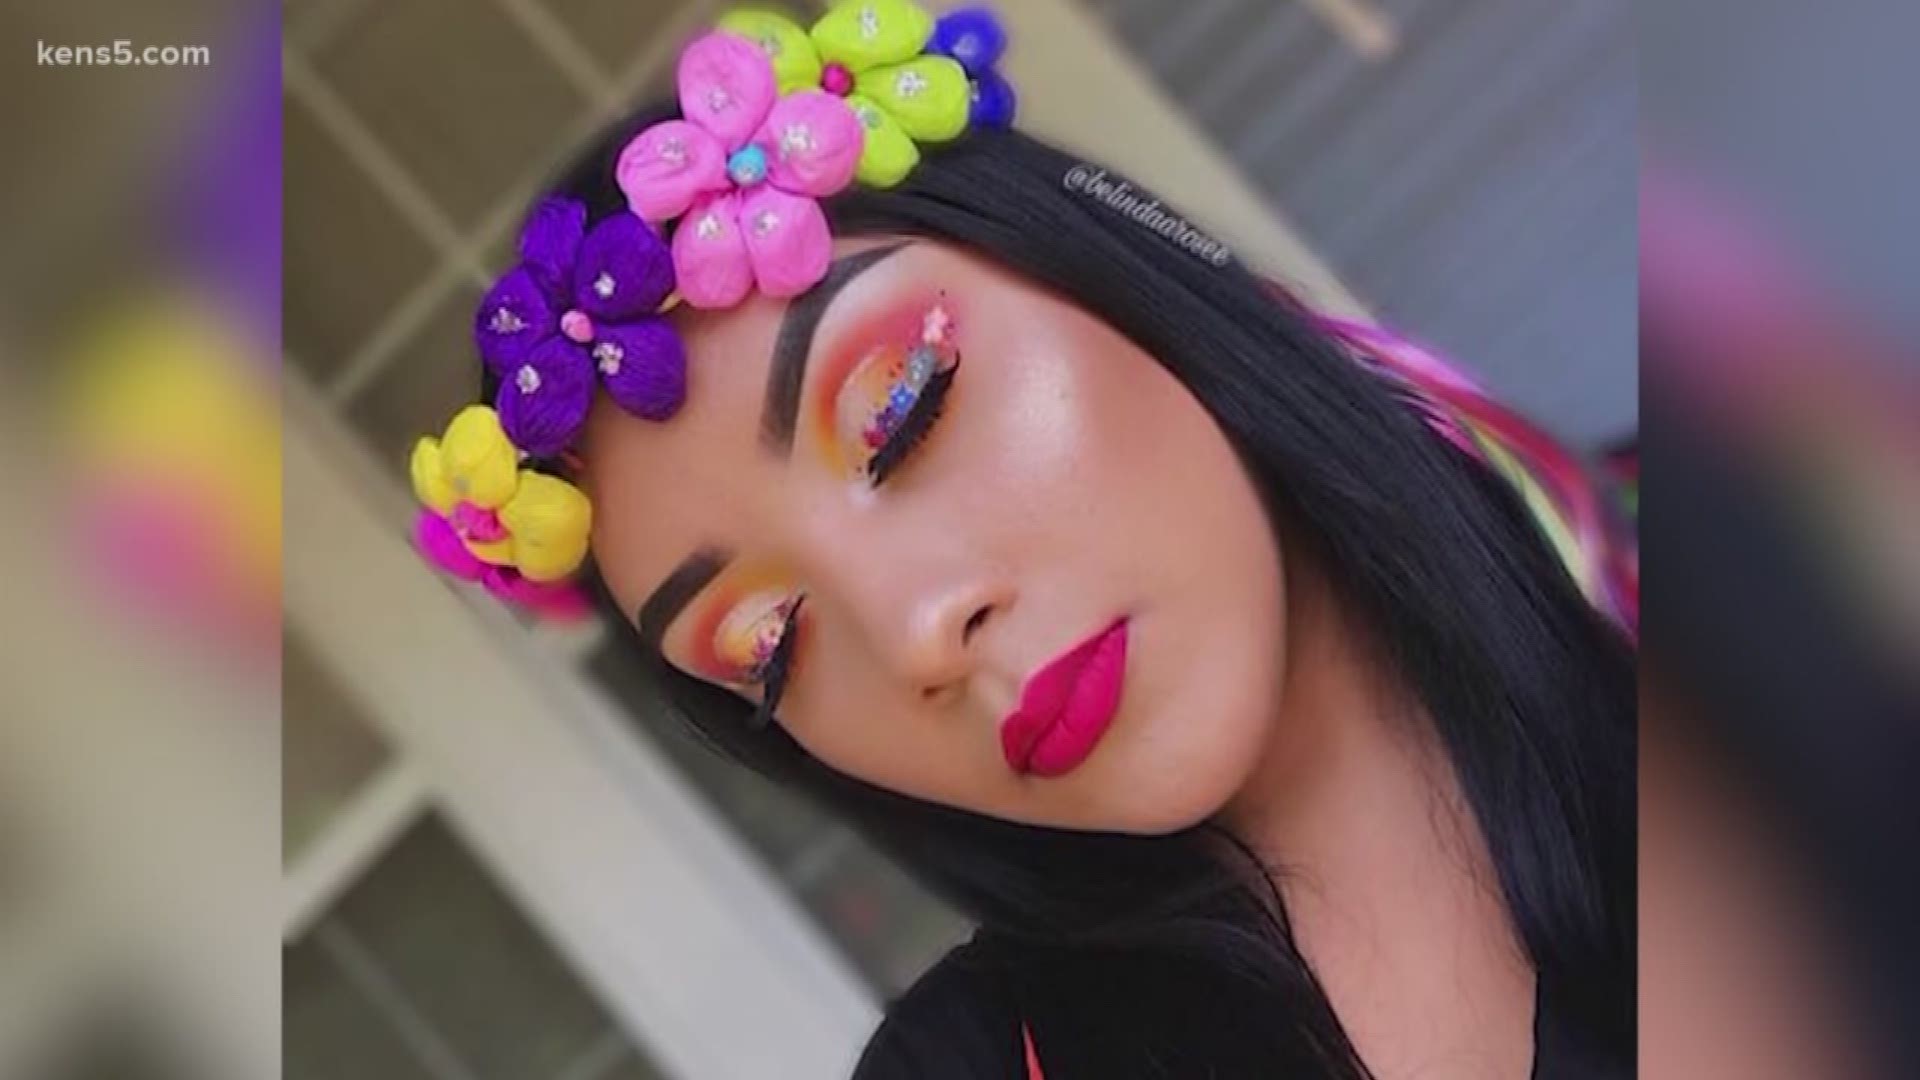 You can't Fiesta without some color! One San Antonio woman has a look so bright, it's gone viral.